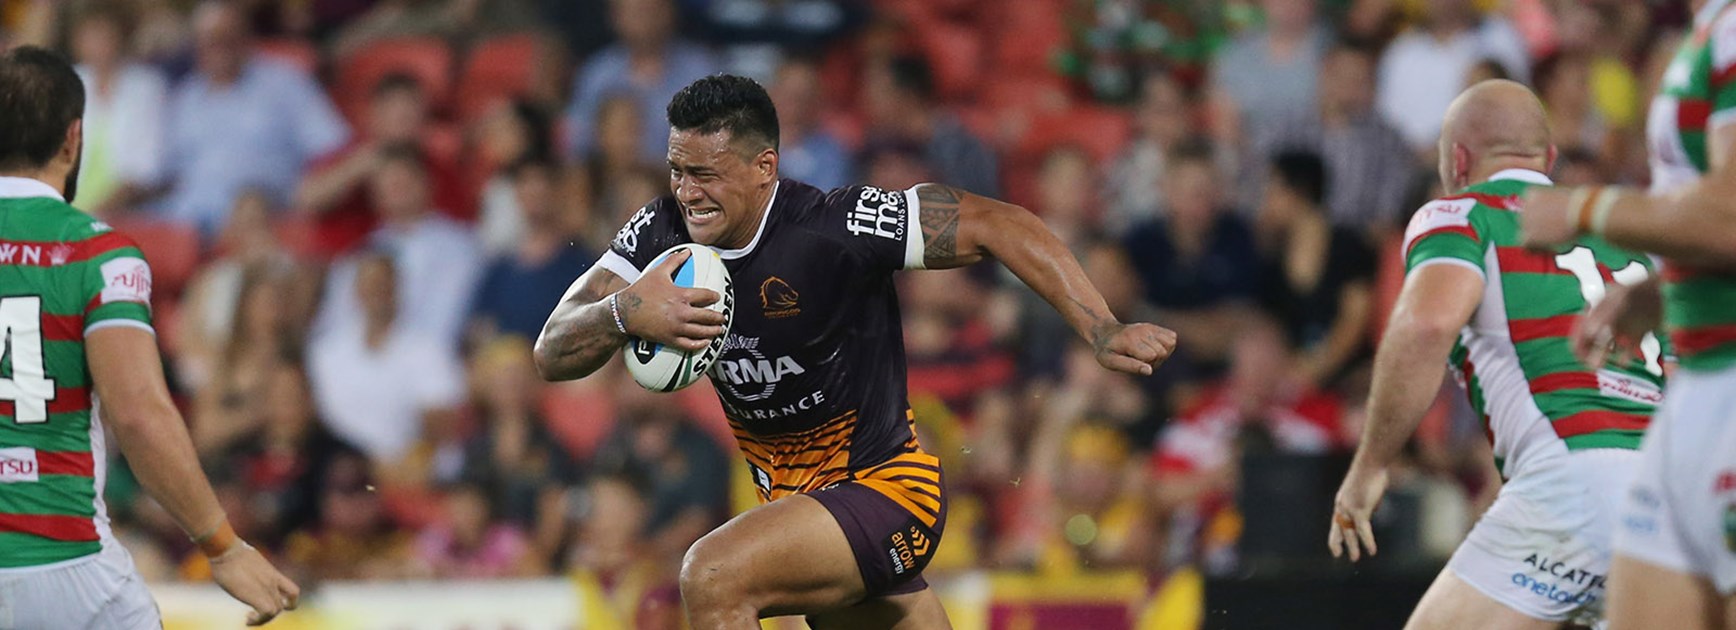 Broncos forward James Gavet on the charge against the Rabbitohs in the 2015 Telstra Premiership season opener.